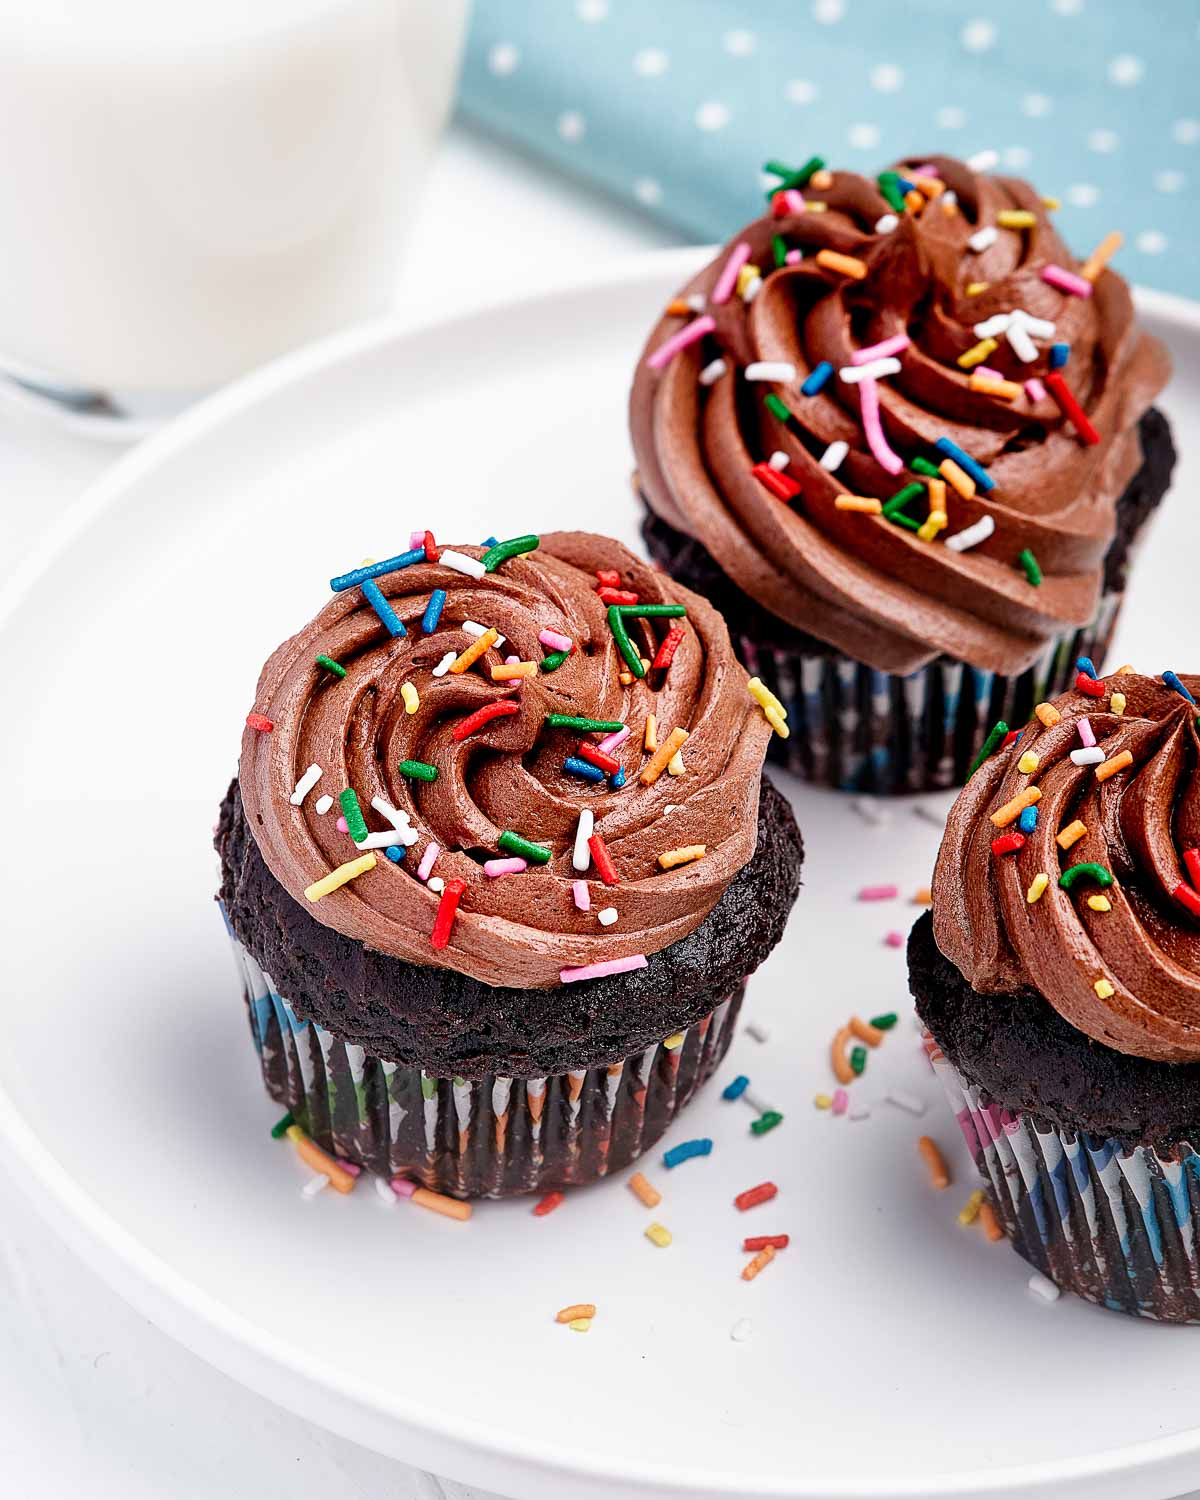 Plate of cupcakes with chocolate frosting and sprinkles.